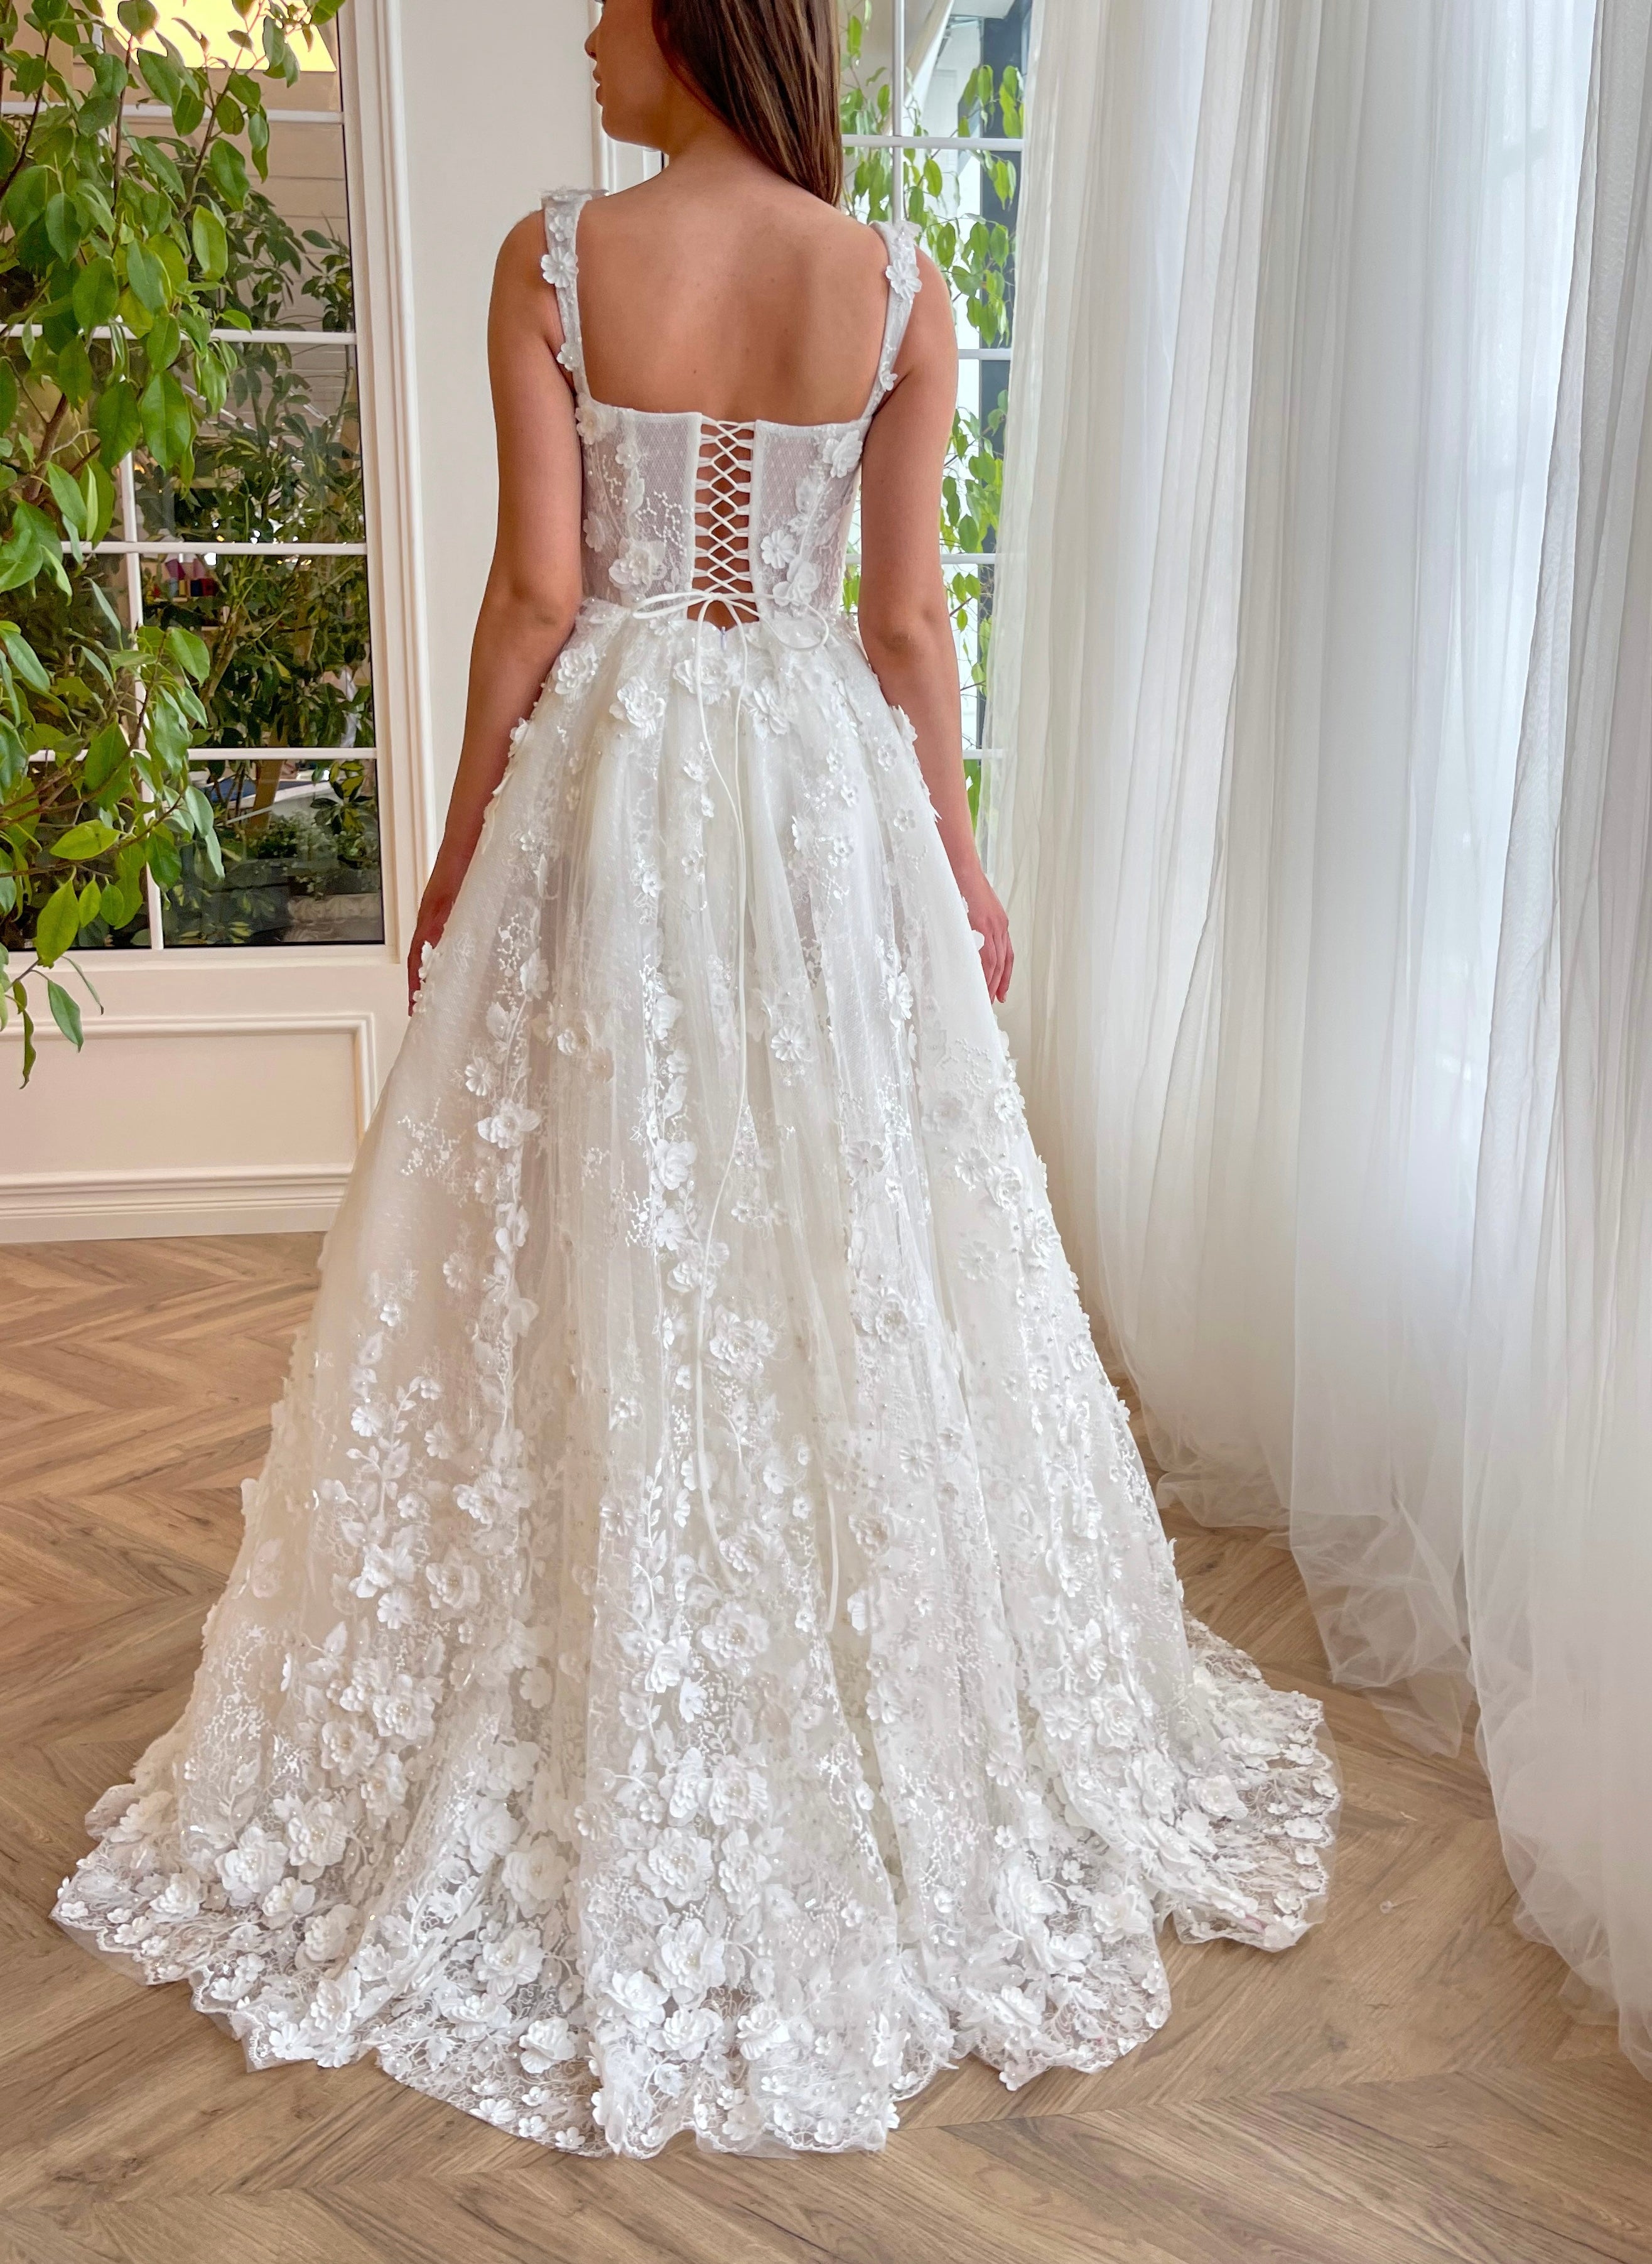 White A-Line bridal dress with straps, flowers and embroidery